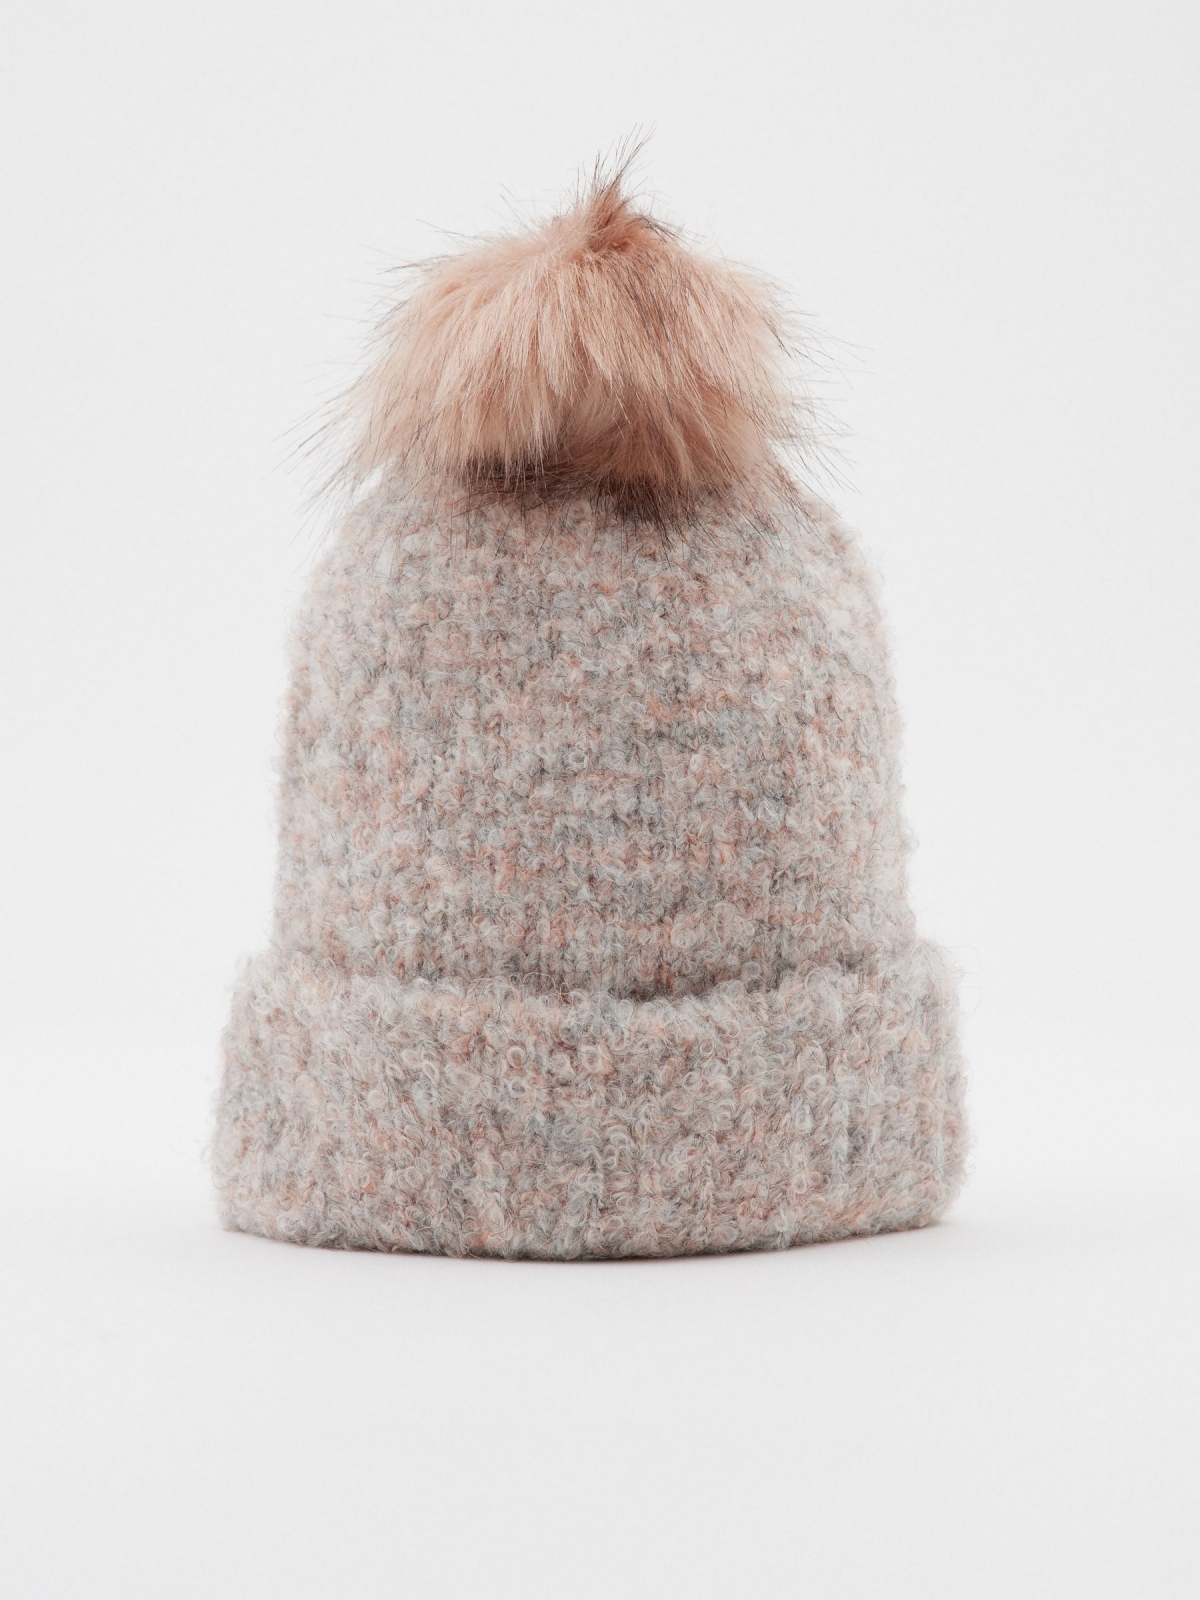 Multicolored hat with pompom pink